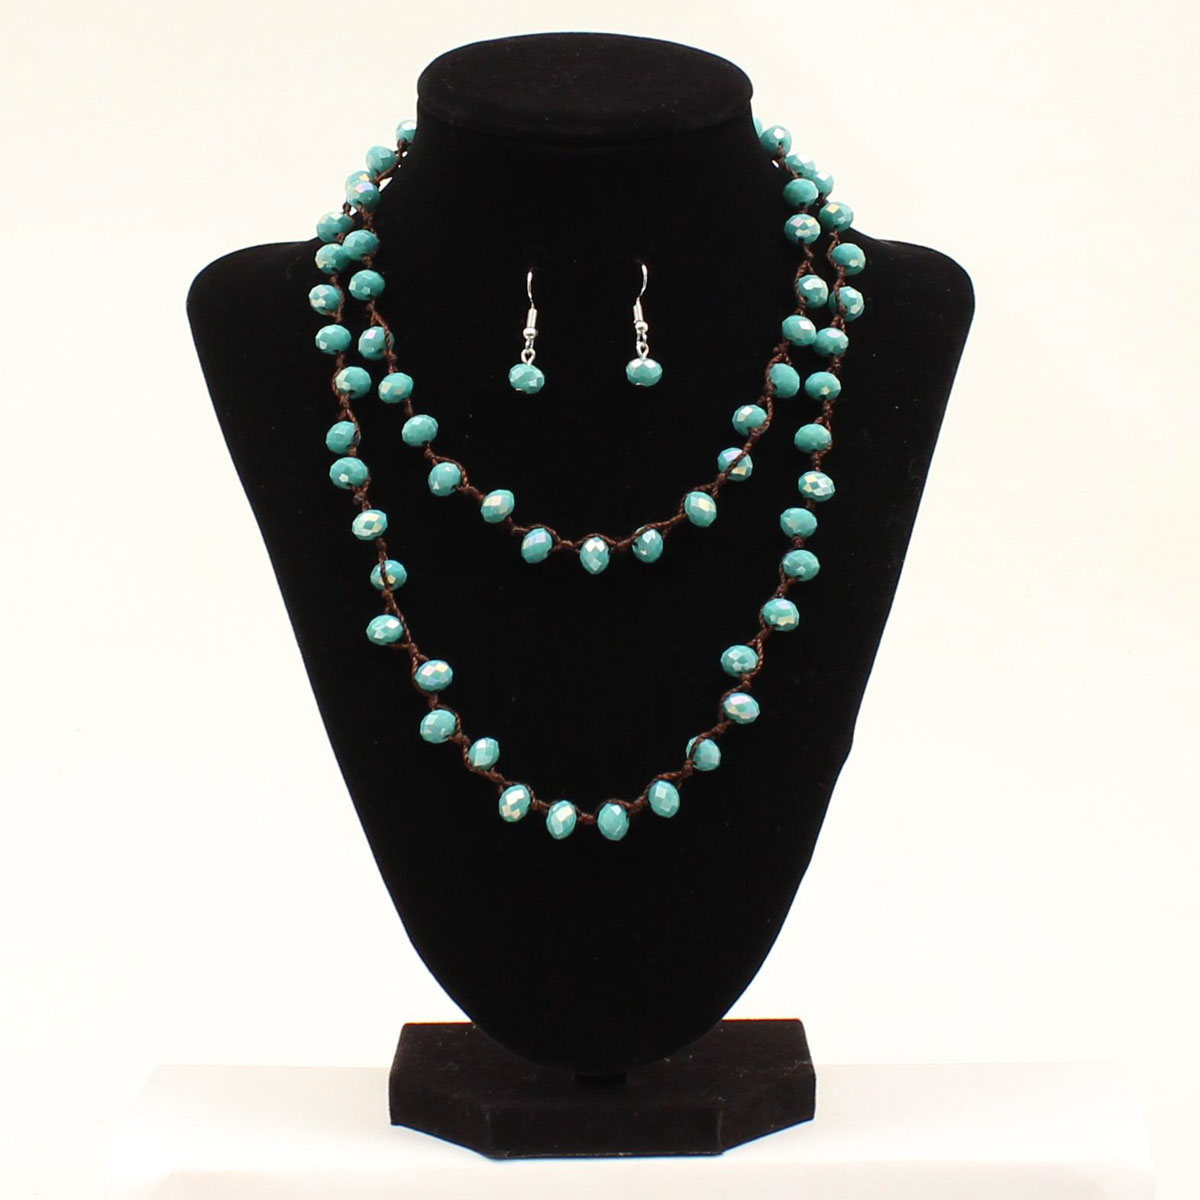 30929 Turquoise Glass Beads Necklace & Earring Set